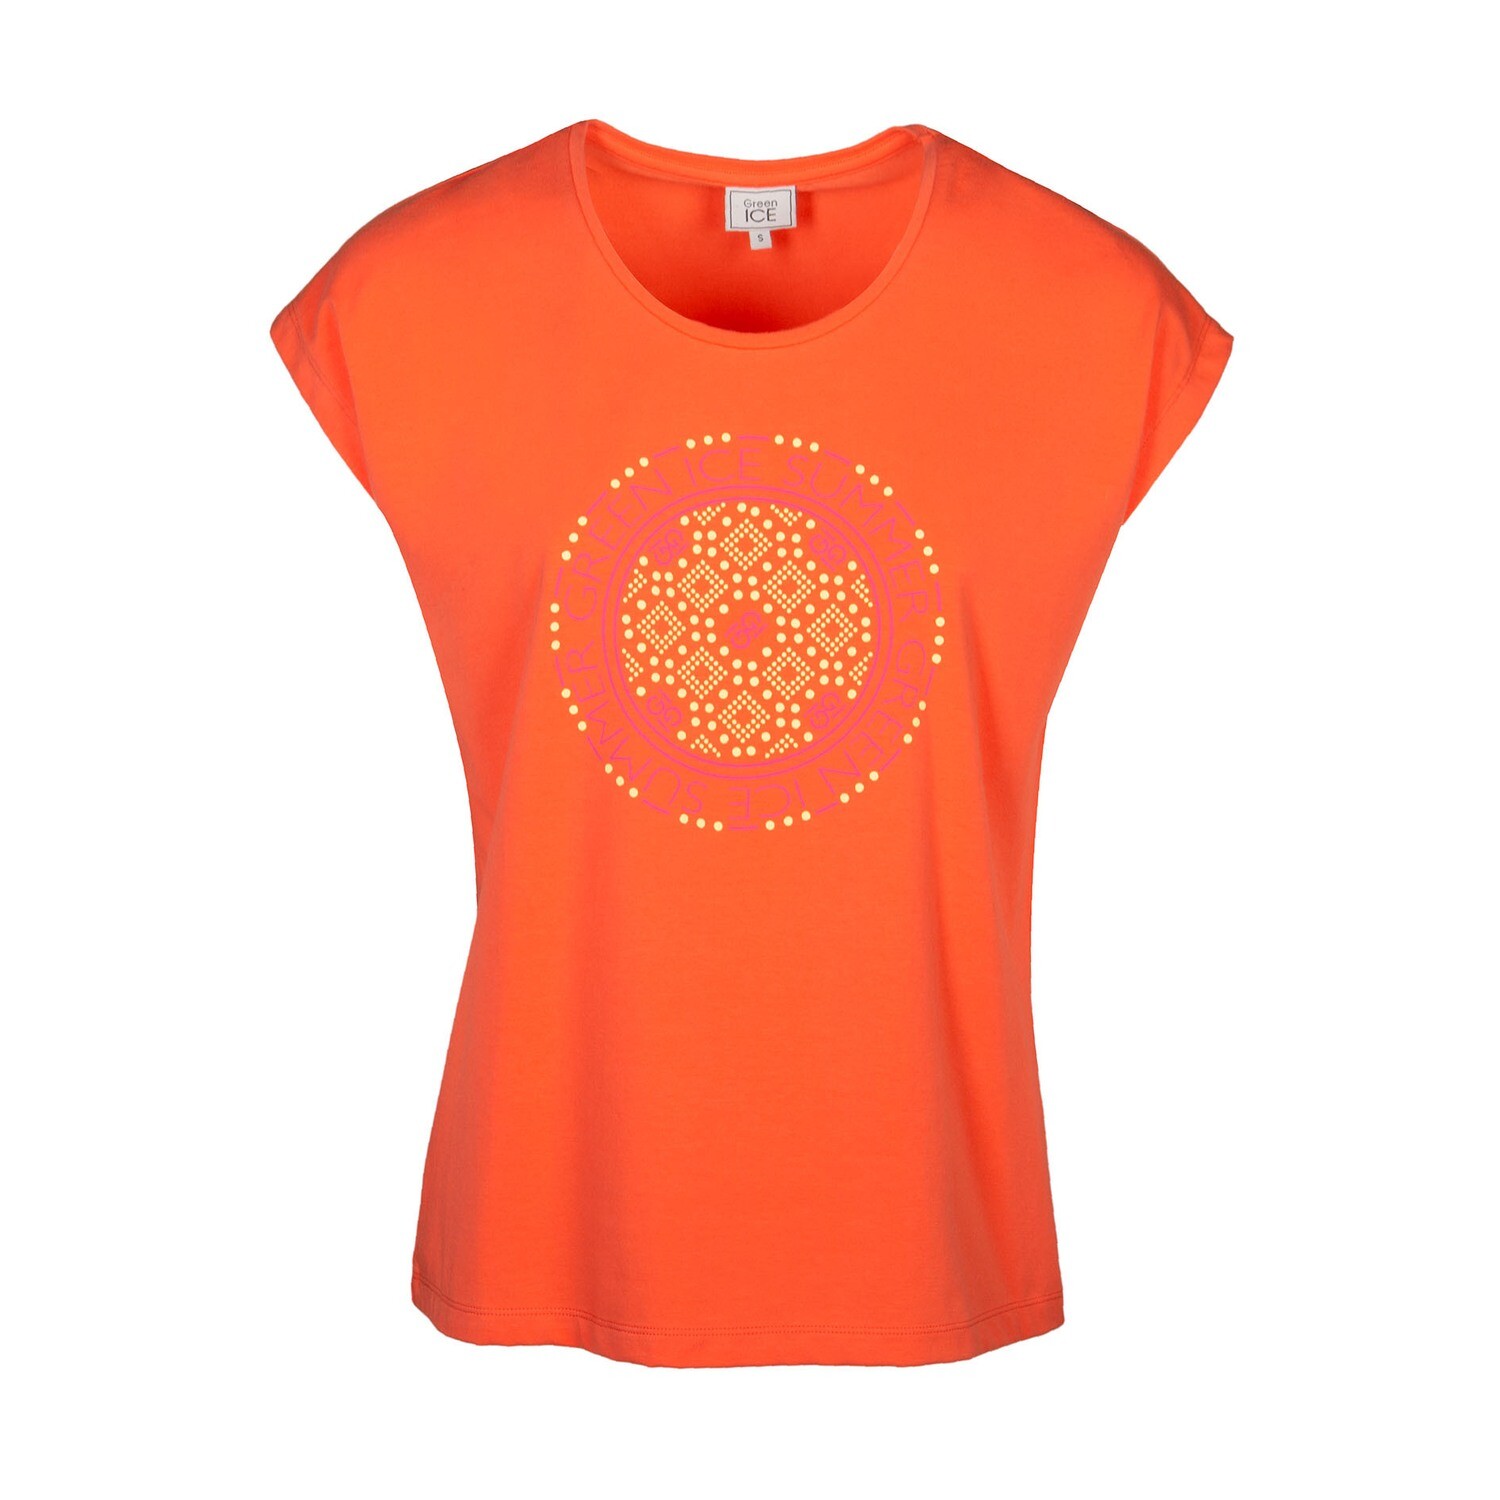 T-SHIRT VAN Green ICE
POMME Coral